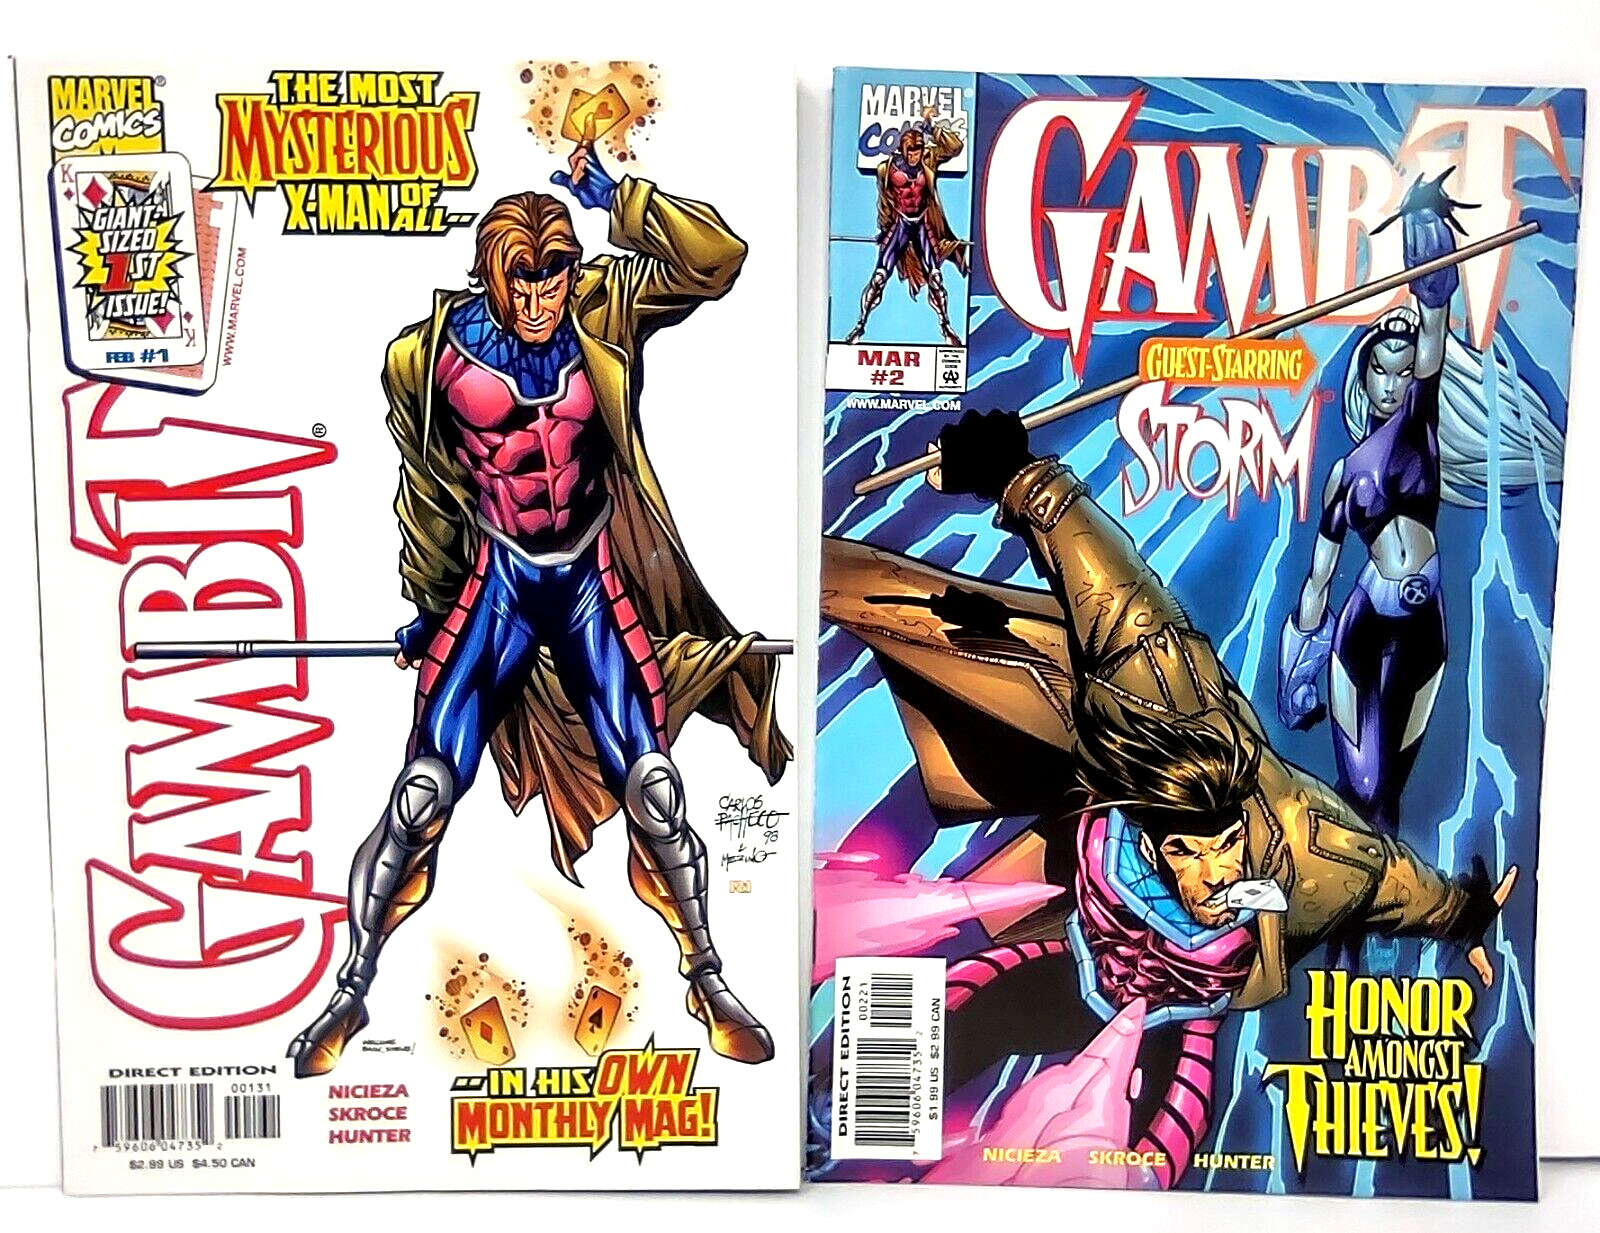 Gambit Volume 2 Issues 1 And Issue 2 Marvel Comics 1999 Lot of 2 VF